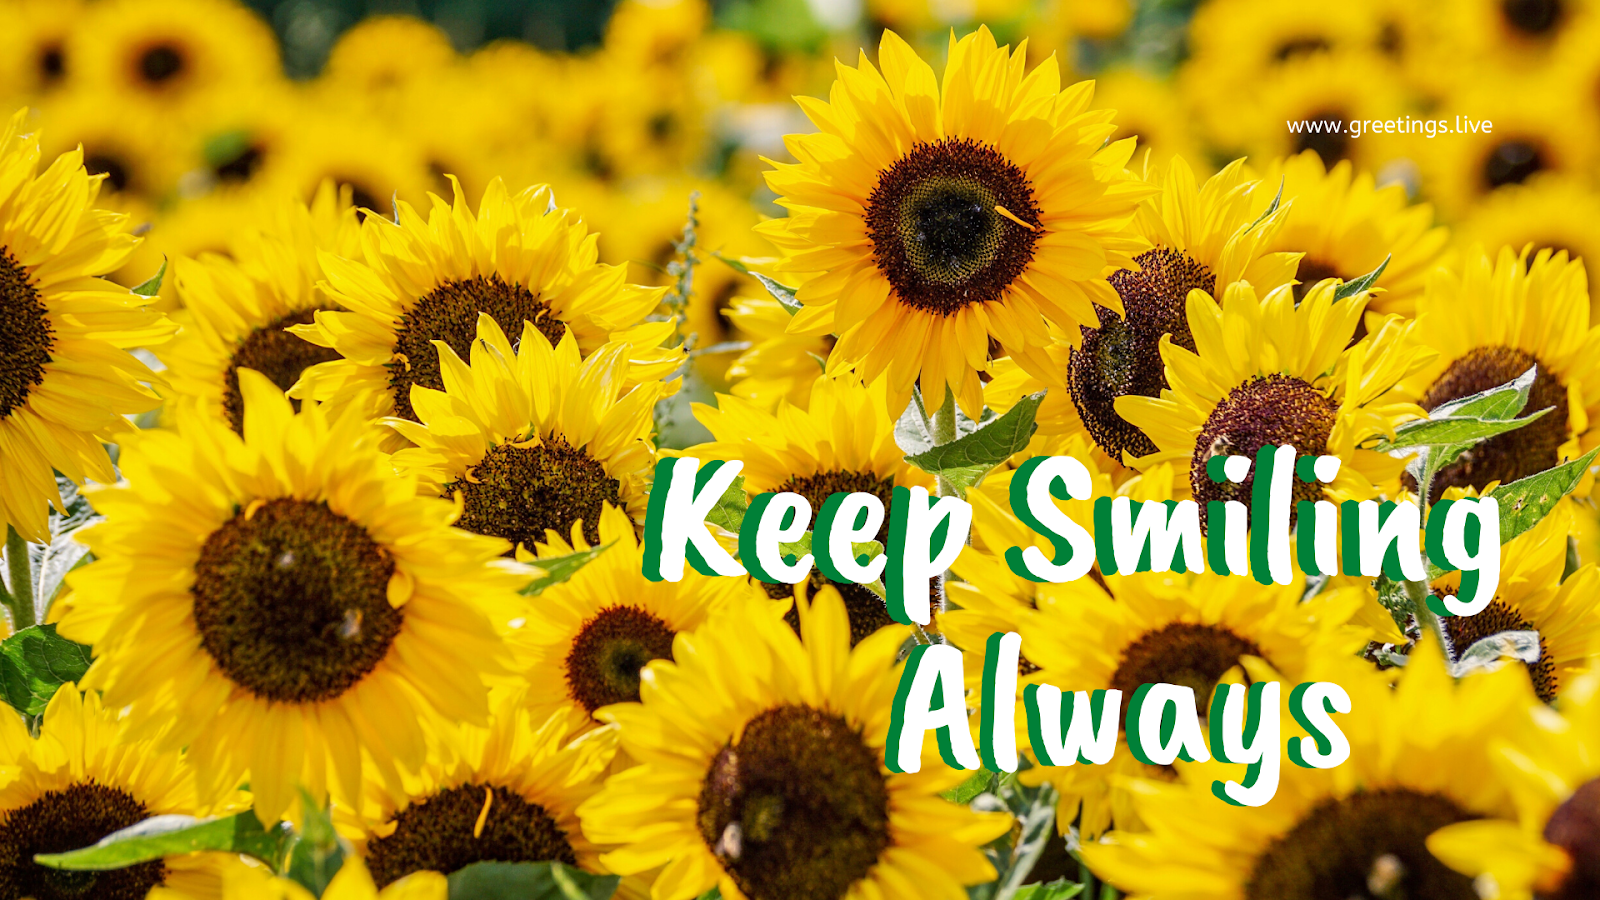 Greetings.Live*Free Daily Greetings Picture Festival GIF Image: keep smiling always desktop wallpaper with sunflowers greetings image